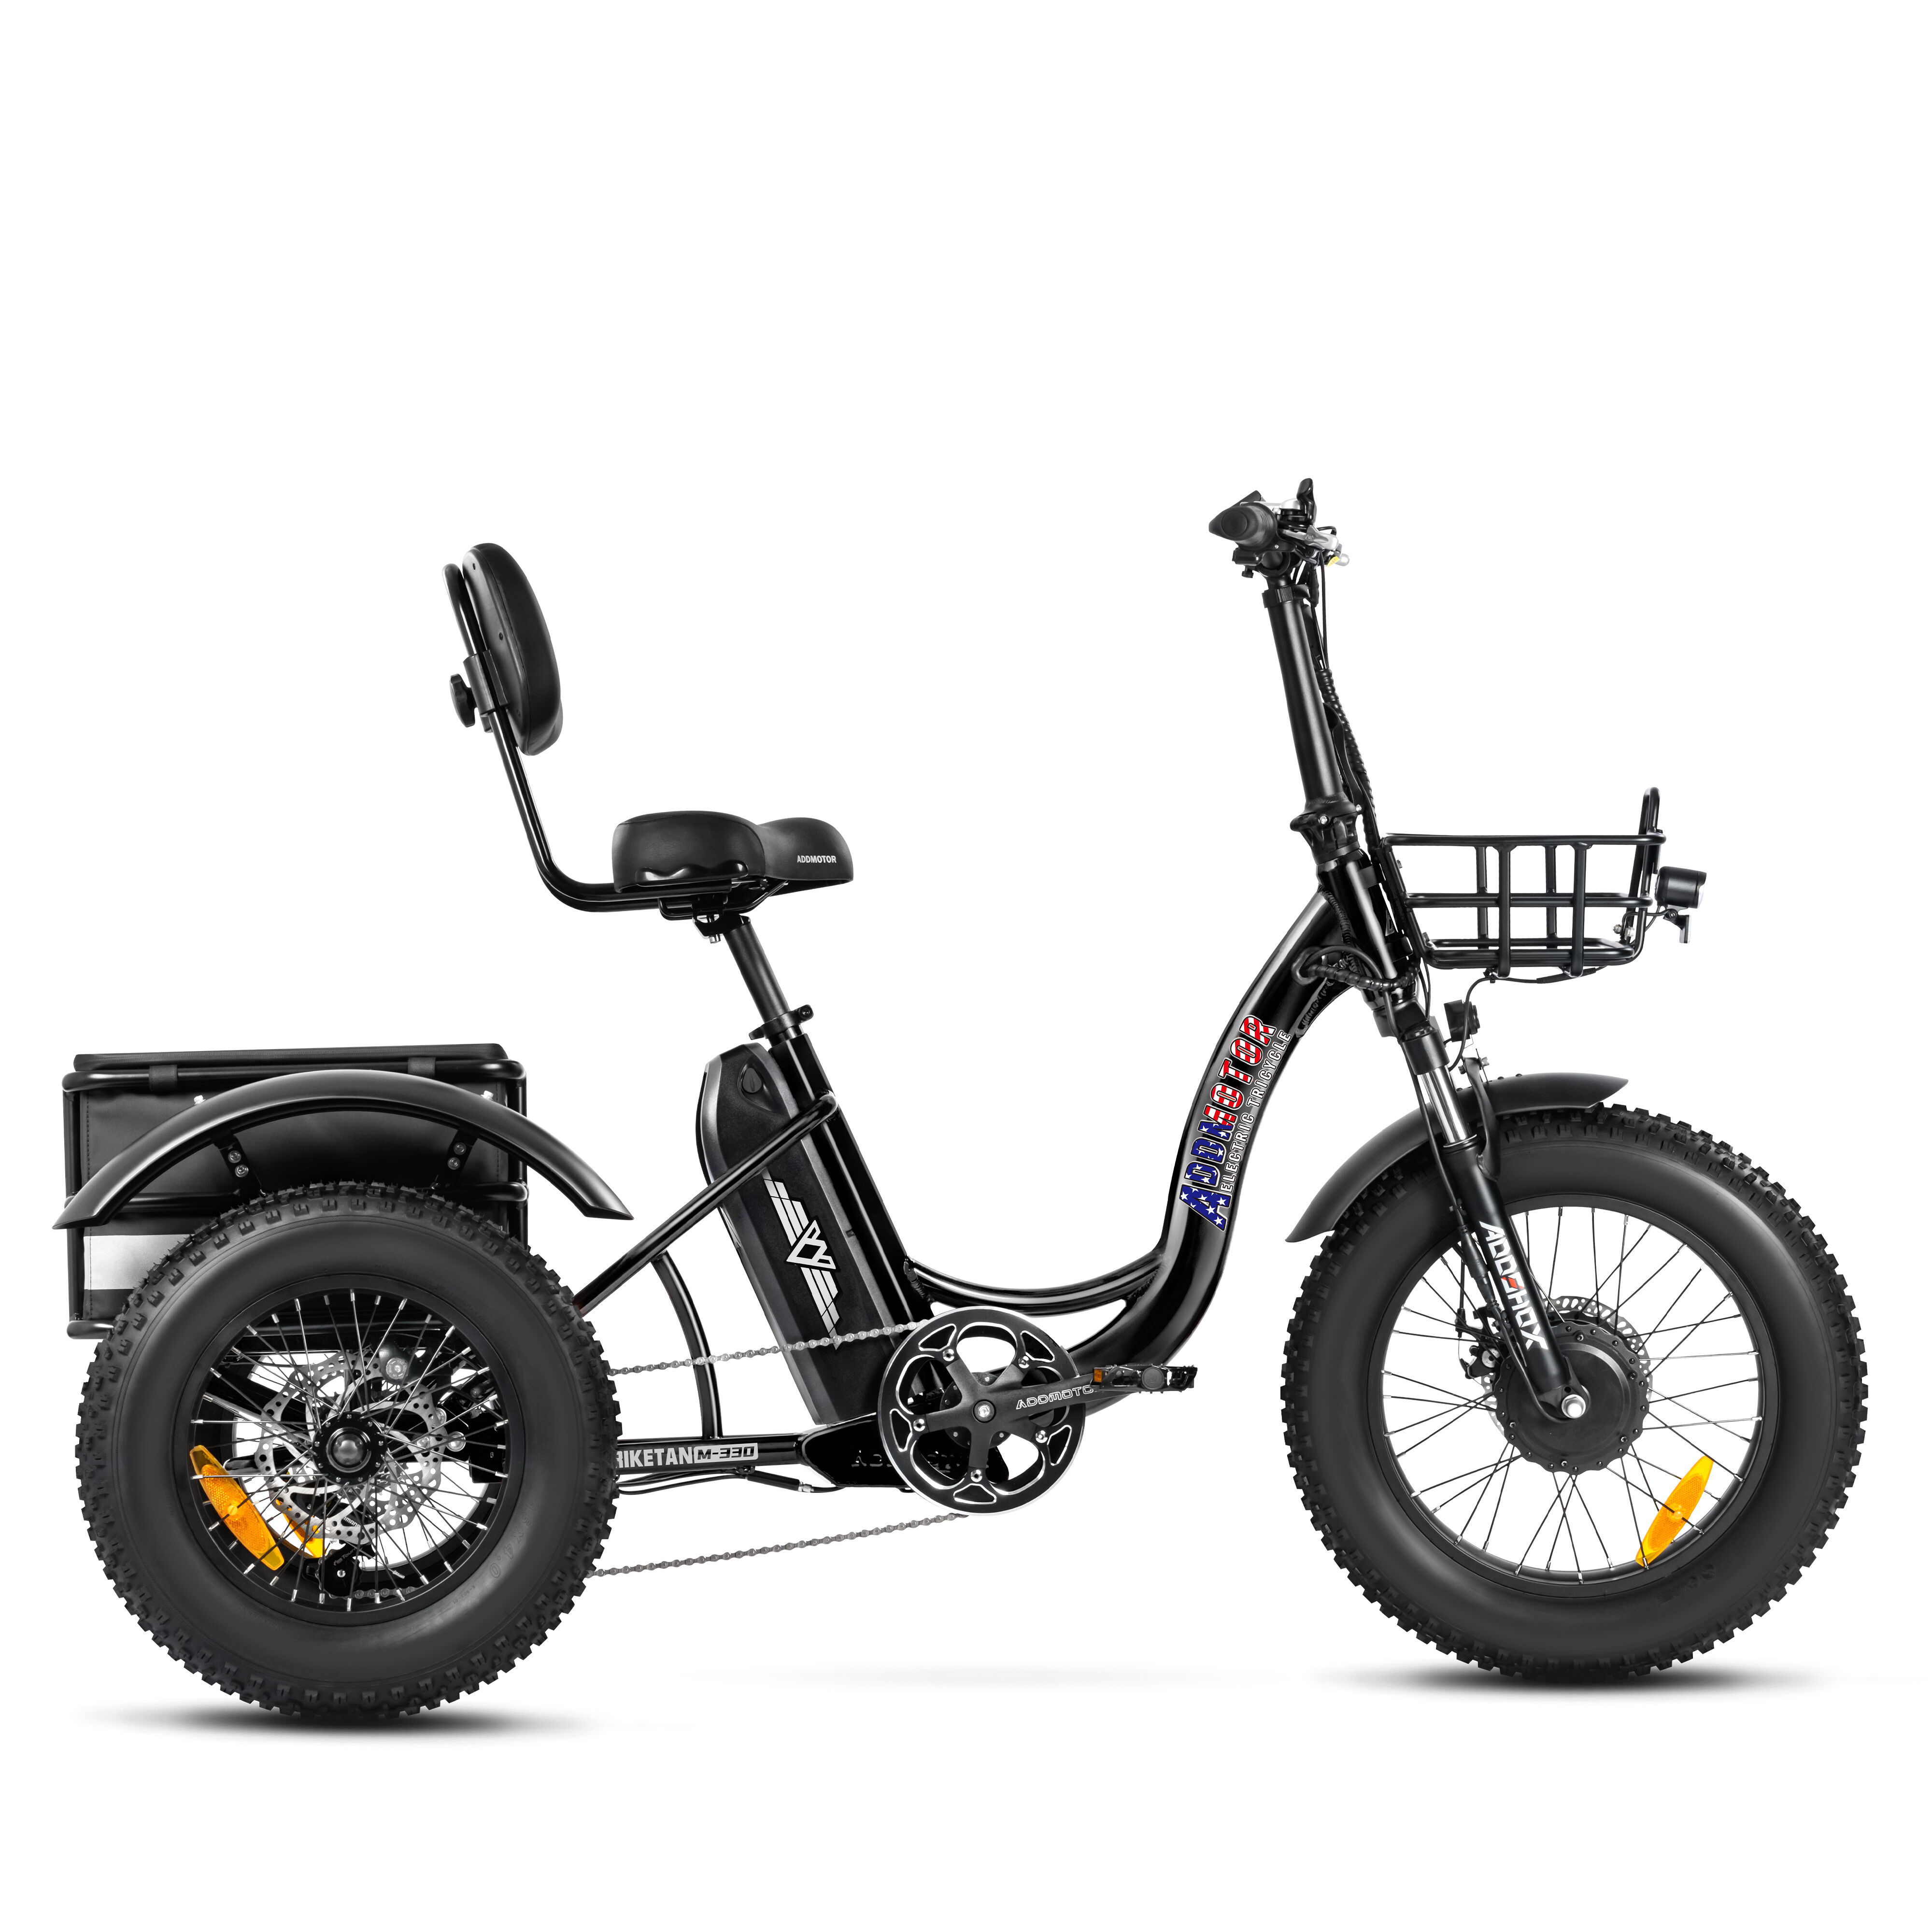 Addmotor M-330 Mini Electric Trike with 750W Motor - Triketan Fat Tire Electric Tricycle for All Terrains - Black